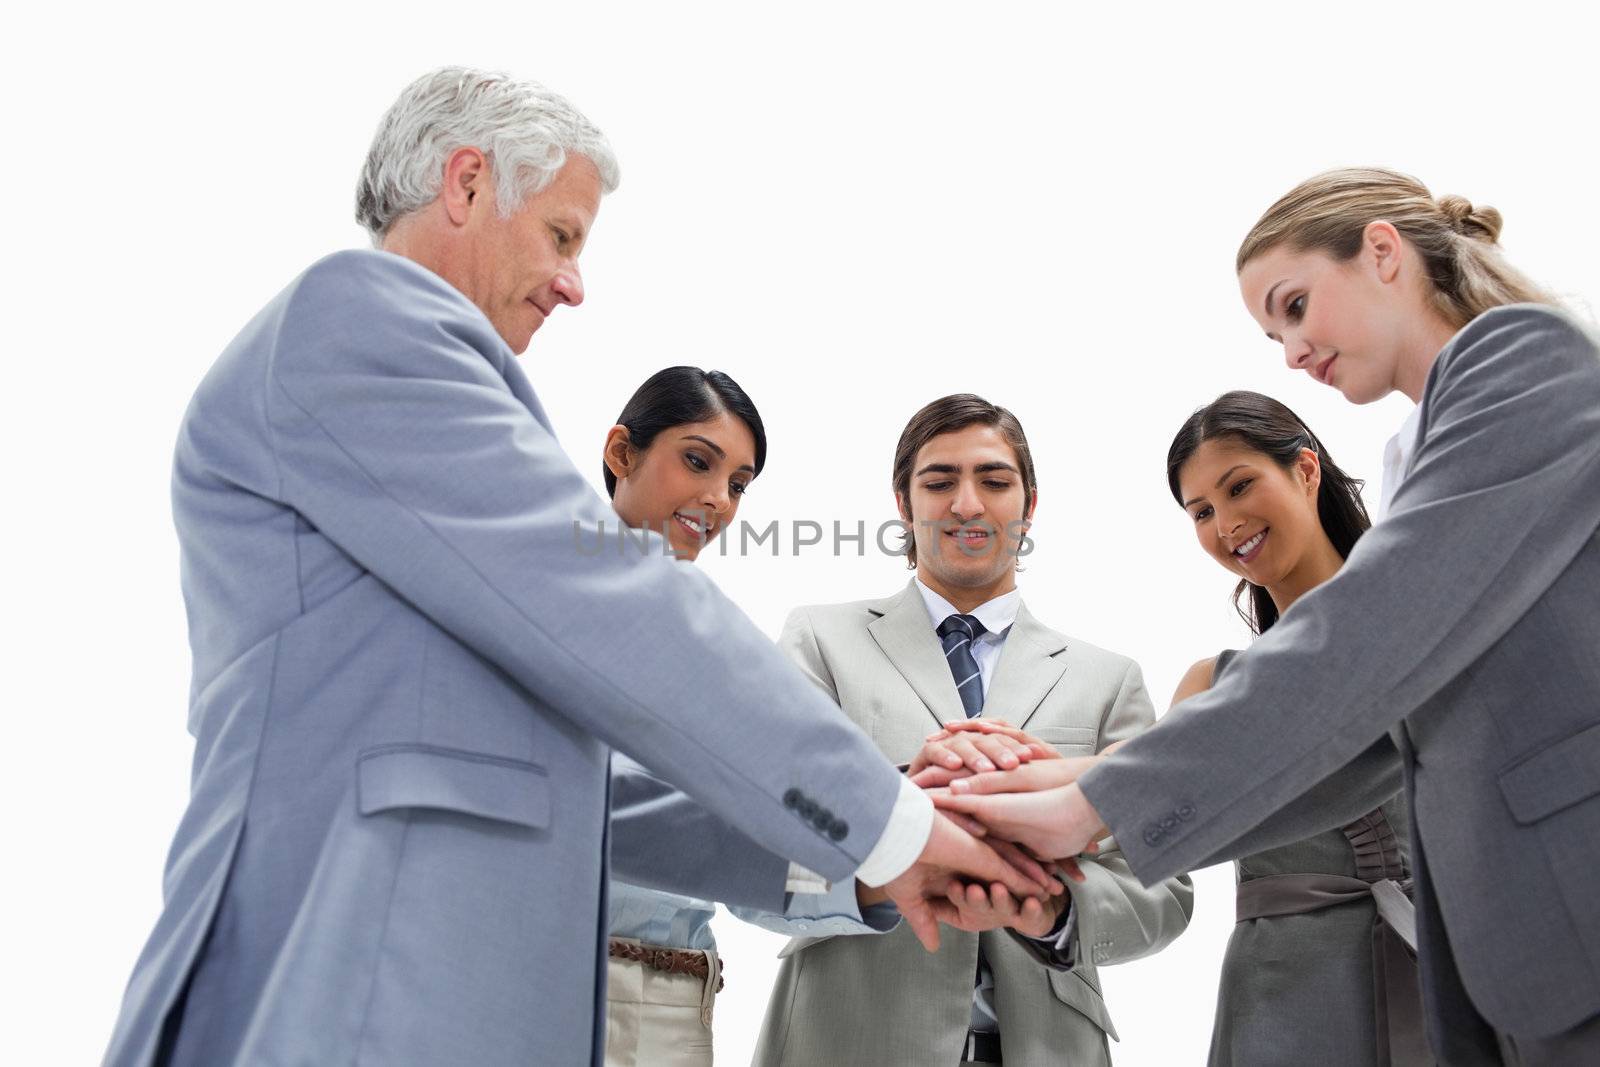 Team putting their hands on each others against white background